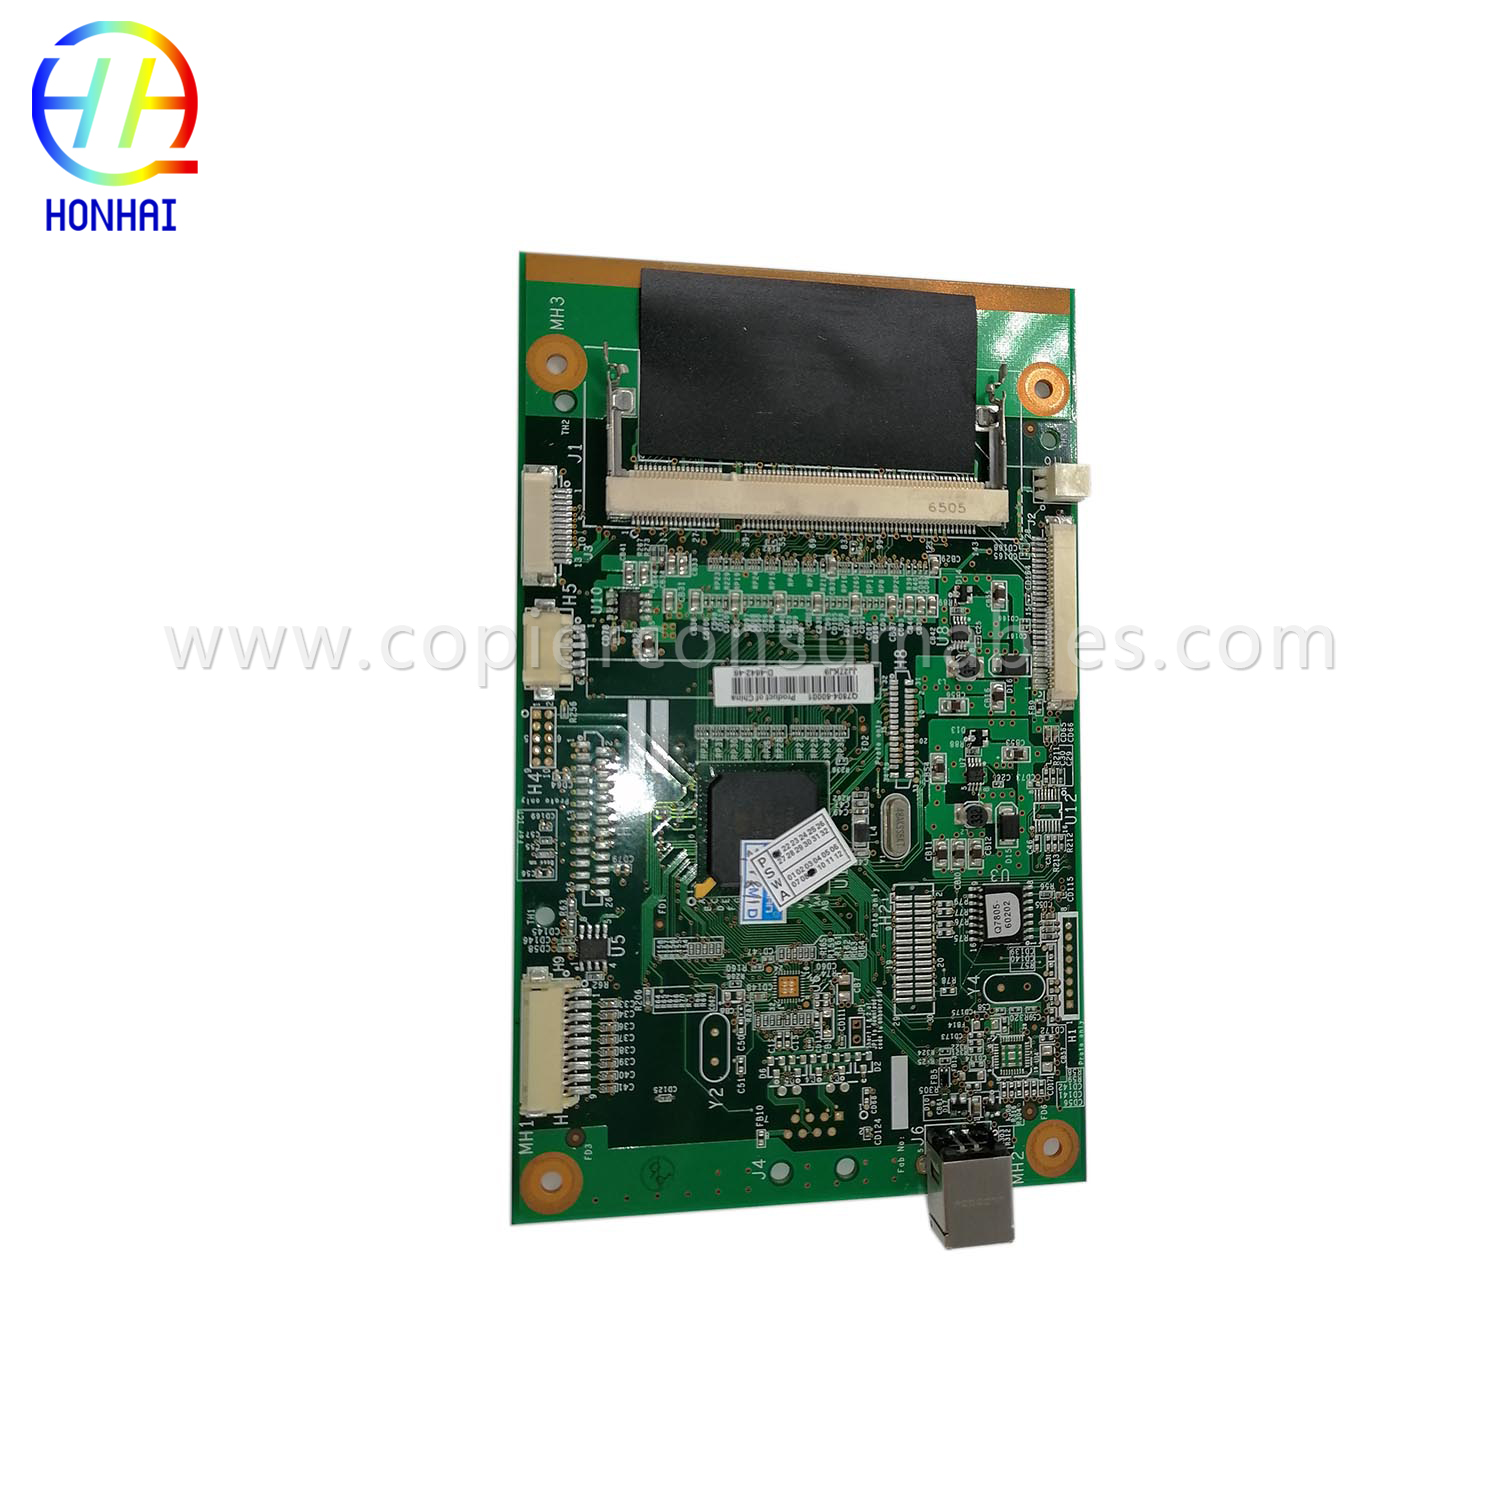 MAIN BOARD FOR HP Laser jet 2015 (6) 拷贝